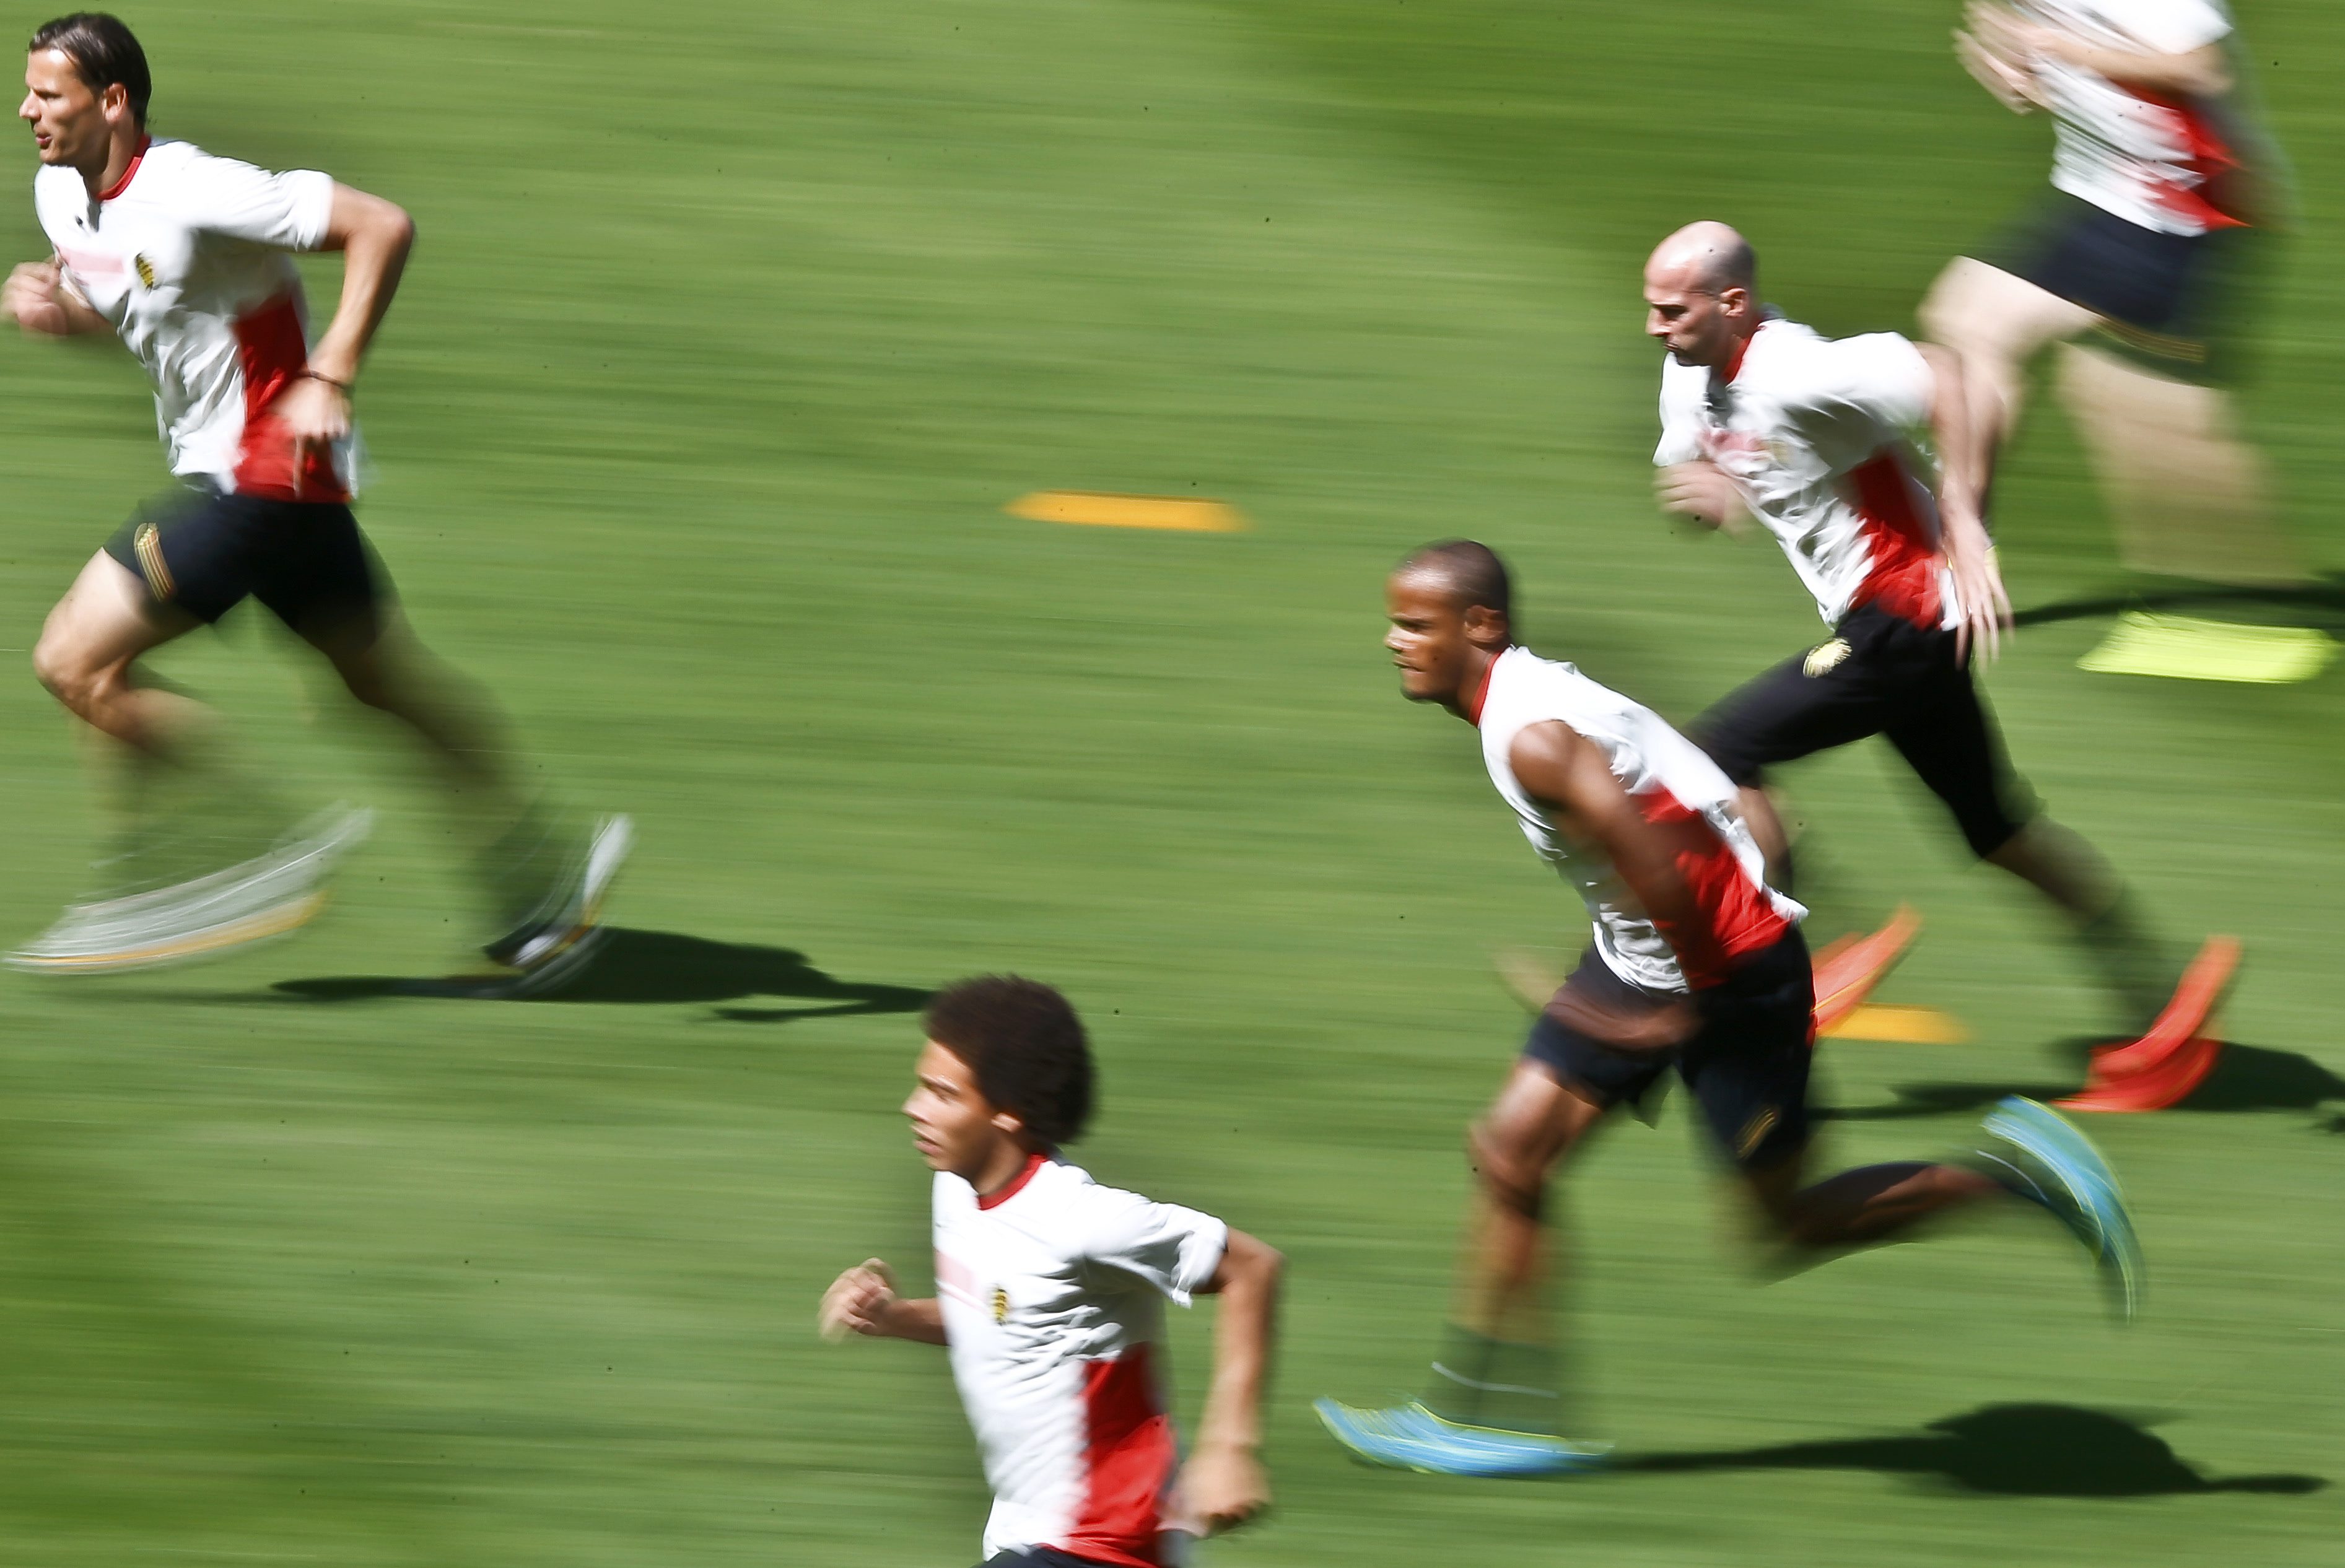 (L-R) Belgium's Daniel van Buyten, Axel Witsel, Vincent Kompany and Laurent Ciman run during a training session in Belo Horizonte June 16, 2014. Belgium will face Algeria in their first 2014 World Cup Group H soccer match on June 17. REUTERS/Dominic Ebenb